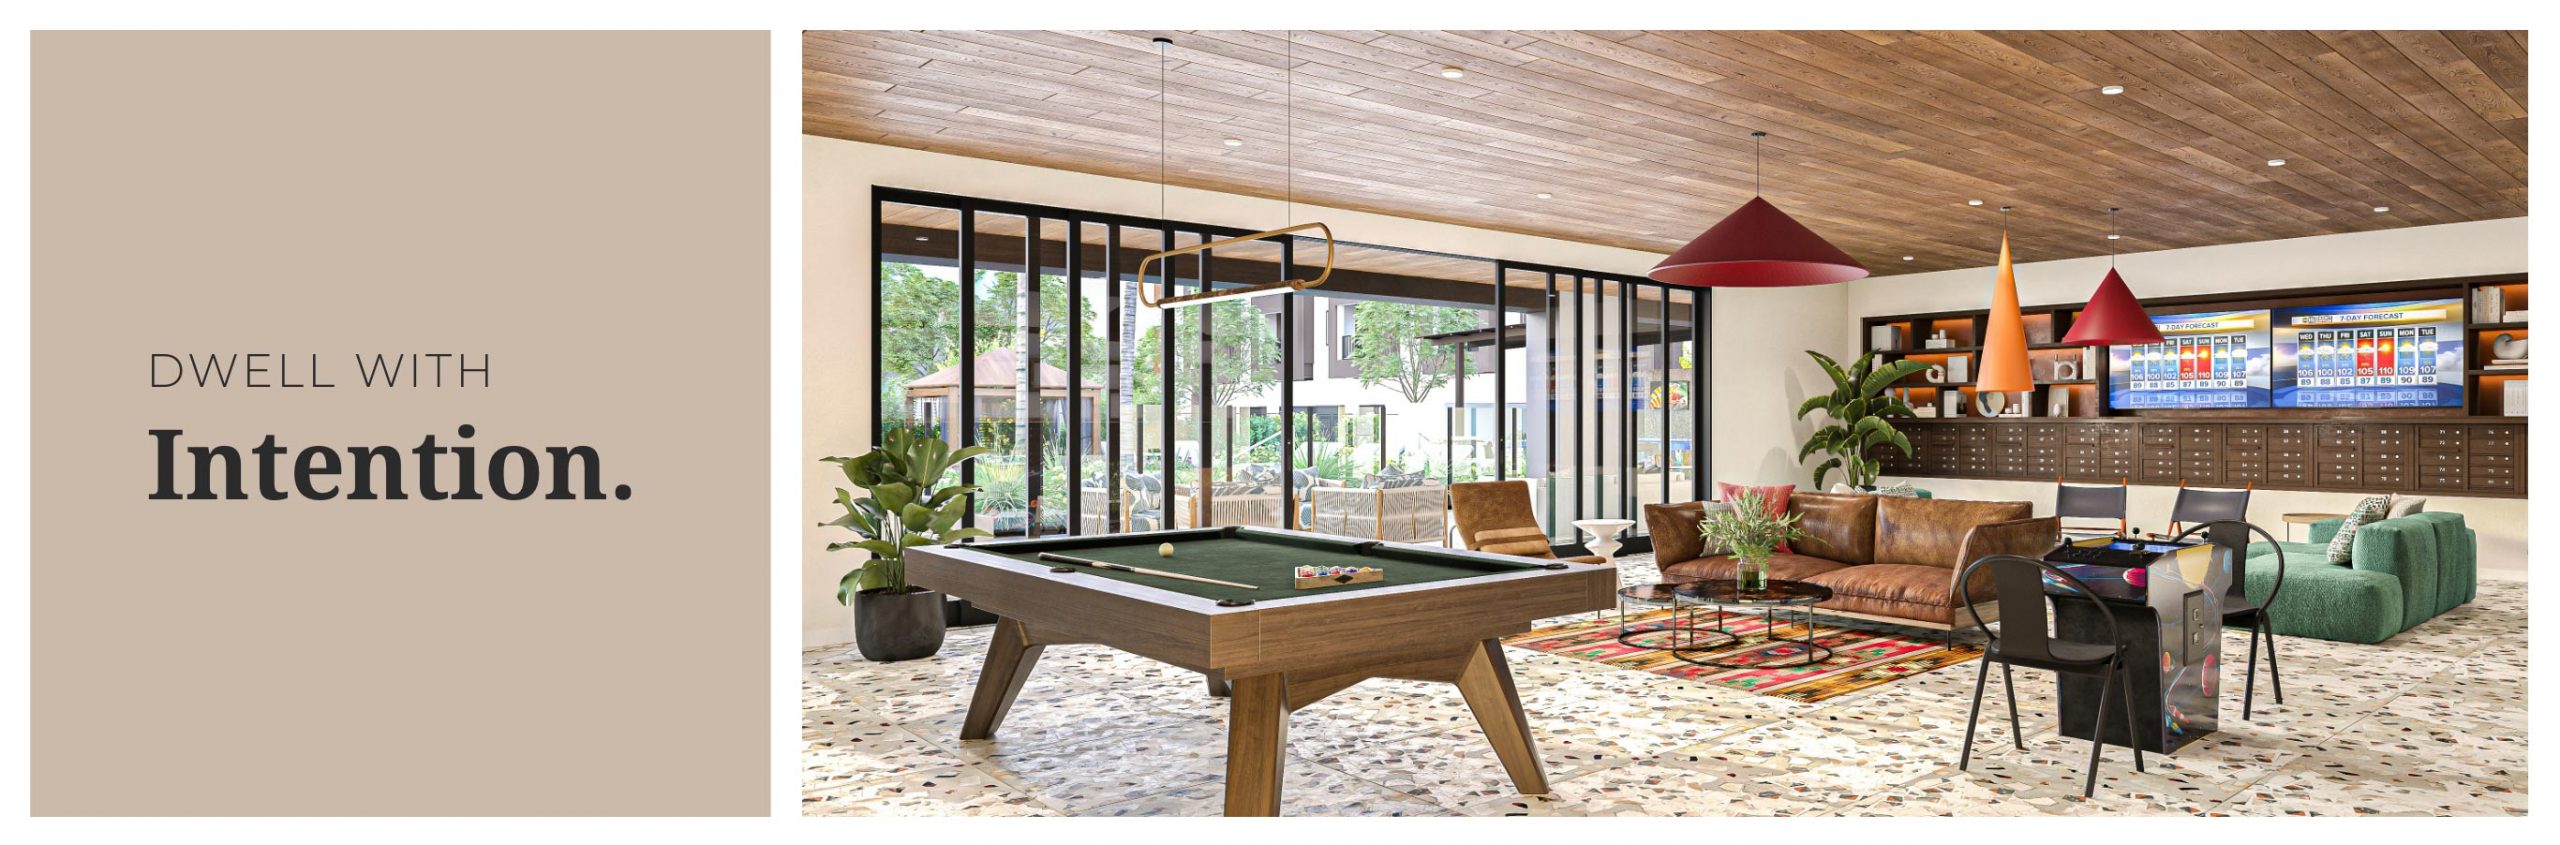 Callia game room with seating, billiards copy: Dwell with intention.